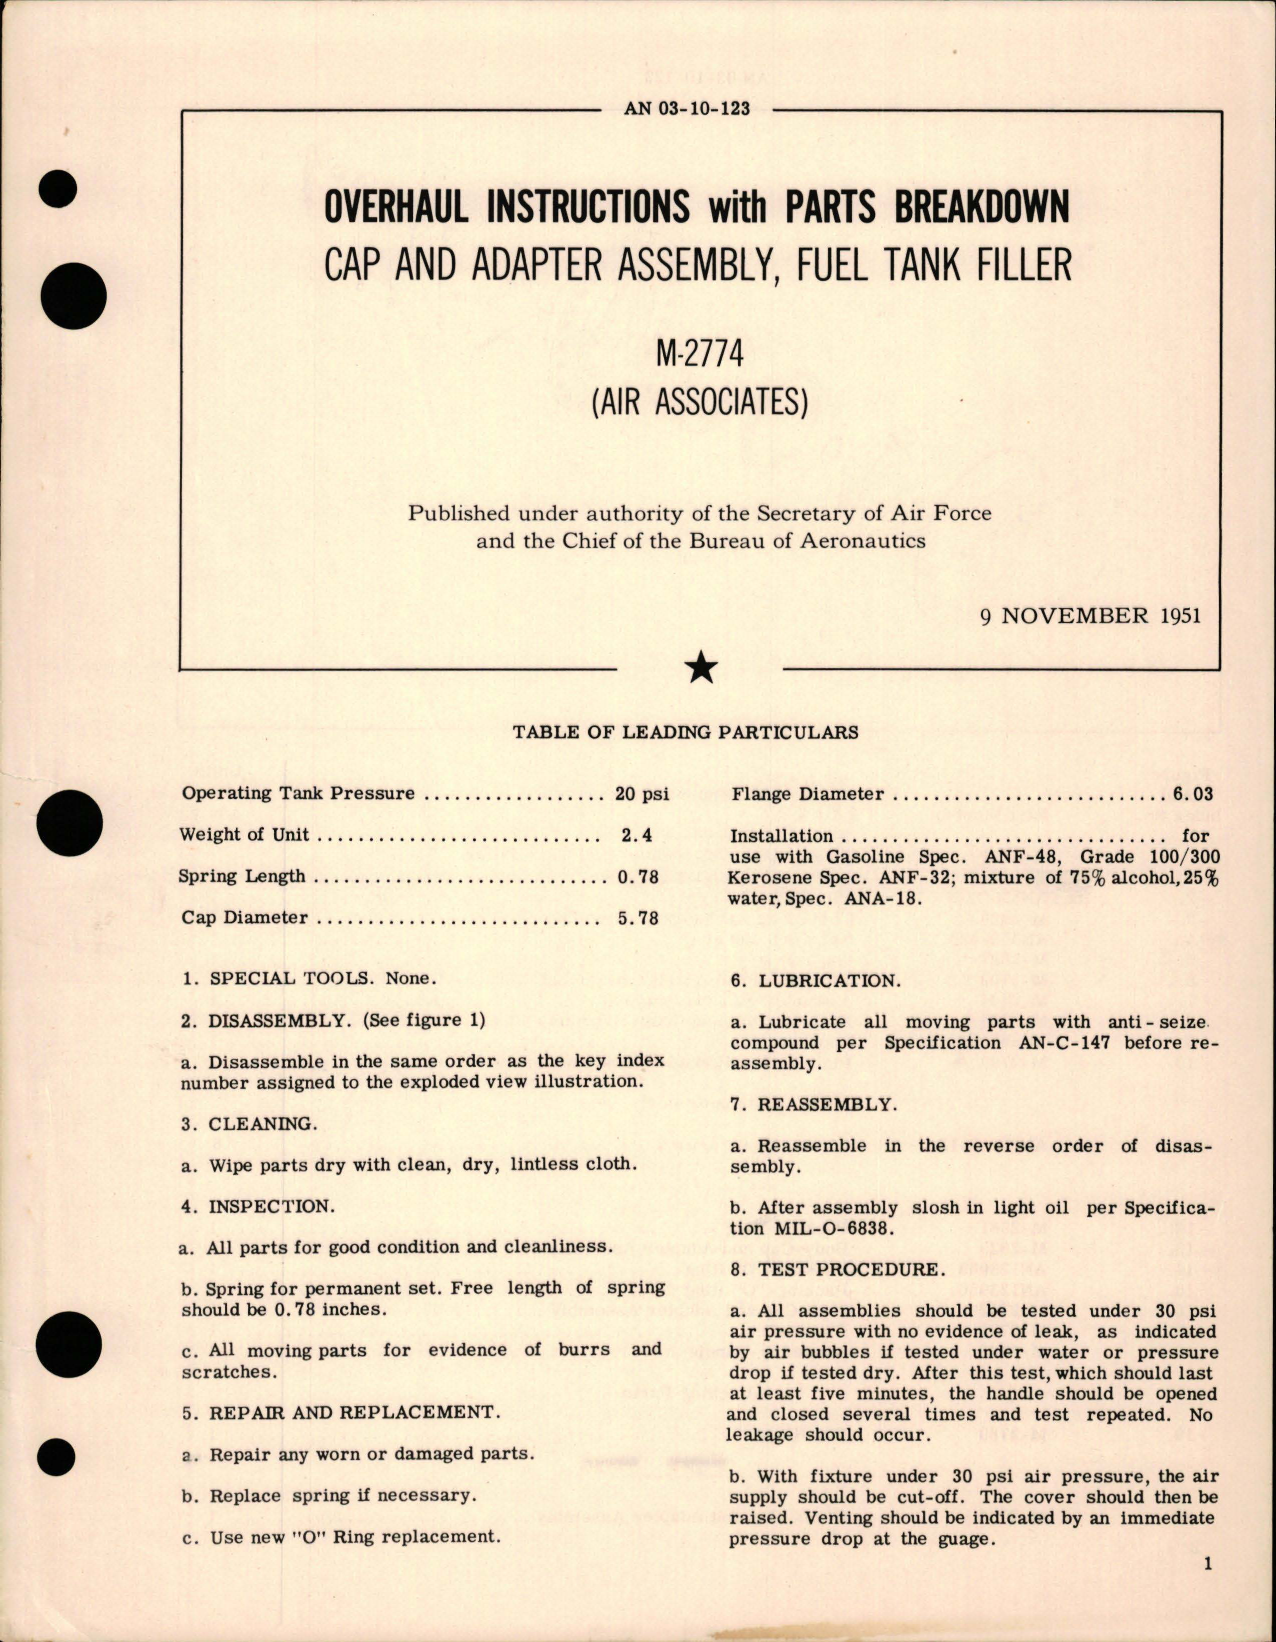 Sample page 1 from AirCorps Library document: Overhaul Instructions with Parts Breakdown for Fuel Tank Filler Cap and Adapter Assembly - M-2774